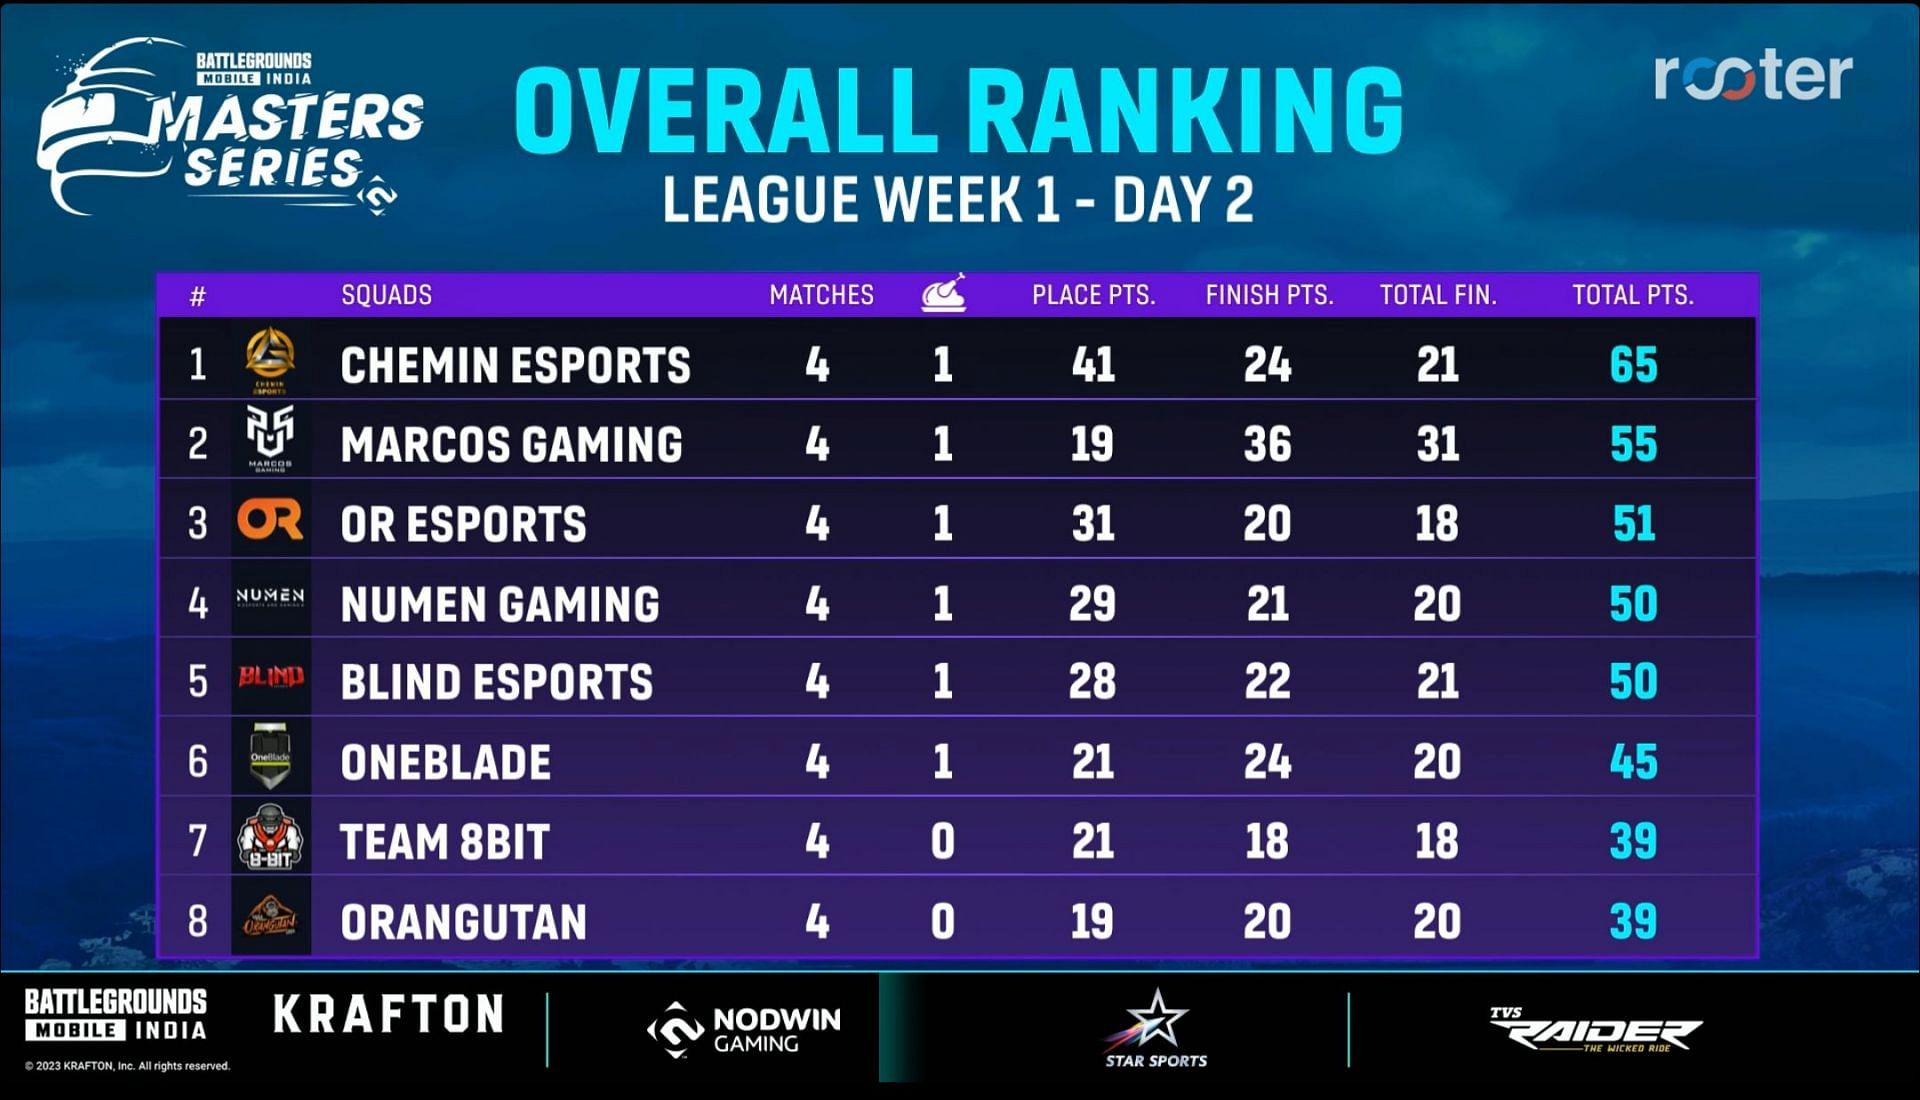 Chemin Esports captures first place after four matches (Image via Rooter)